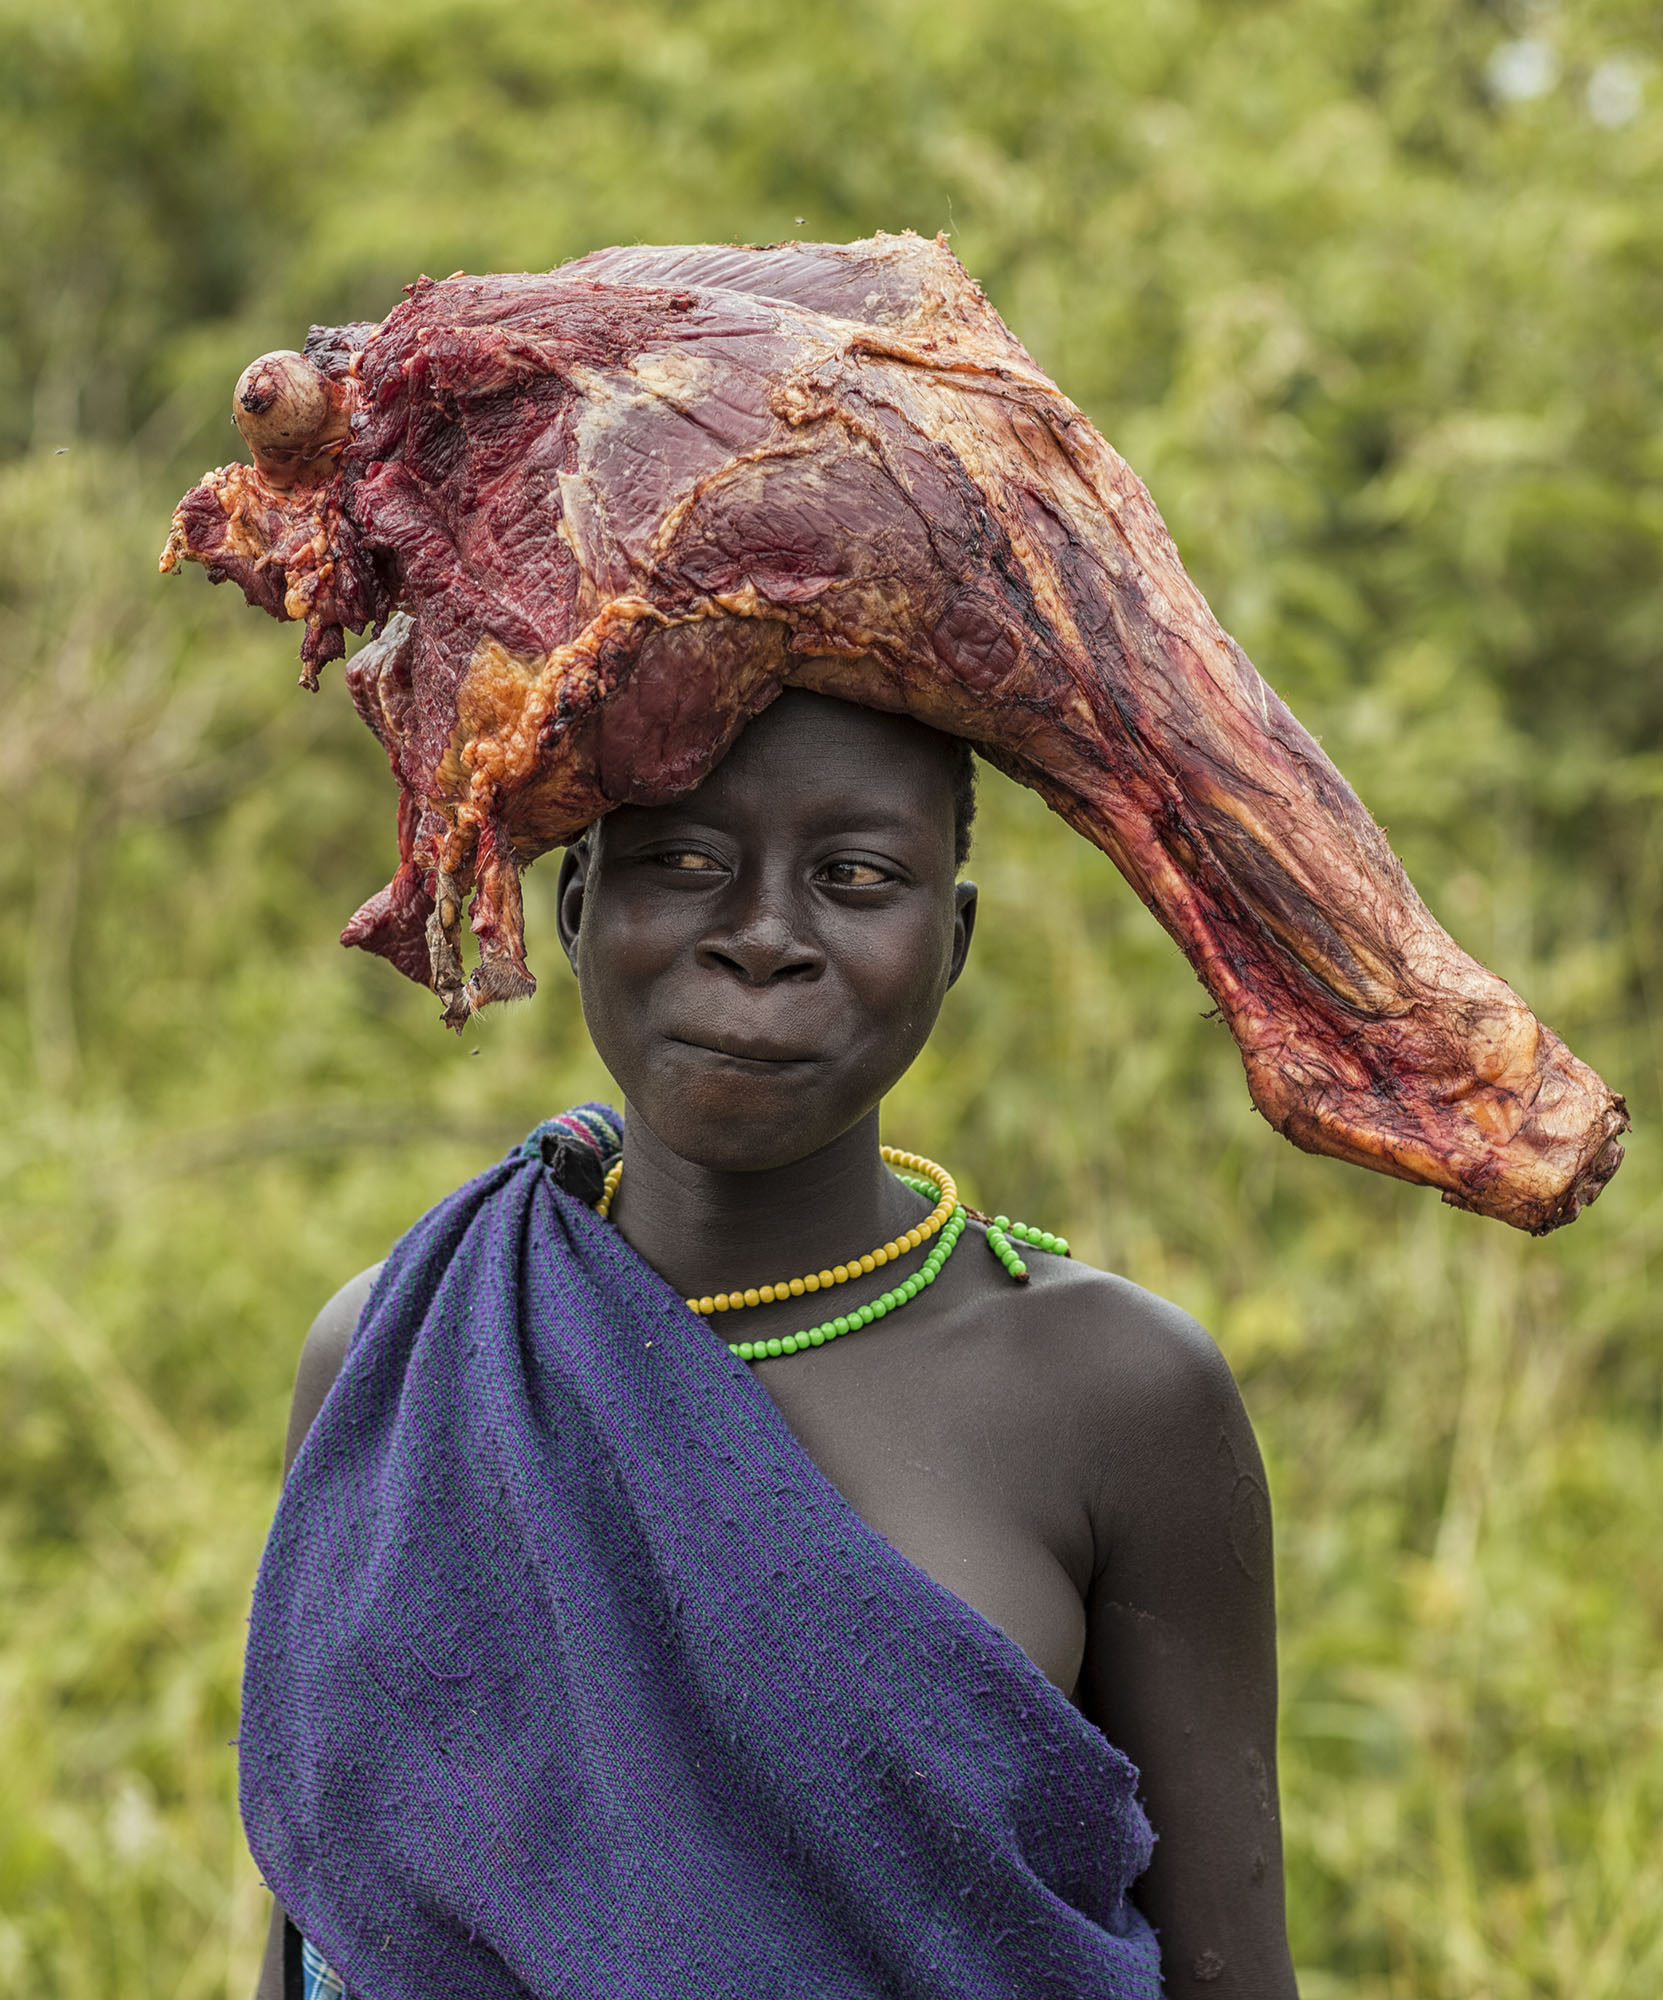 'Trip to the Butcher' - Suri share a border with Soth Sudanese tribes and there is often conflict. Cattle is often stolen or killed. To prevent this the Suri people keep there livestock many days walk away and out of danger. Pictured is girl who was on the walk back from the cattle camp.